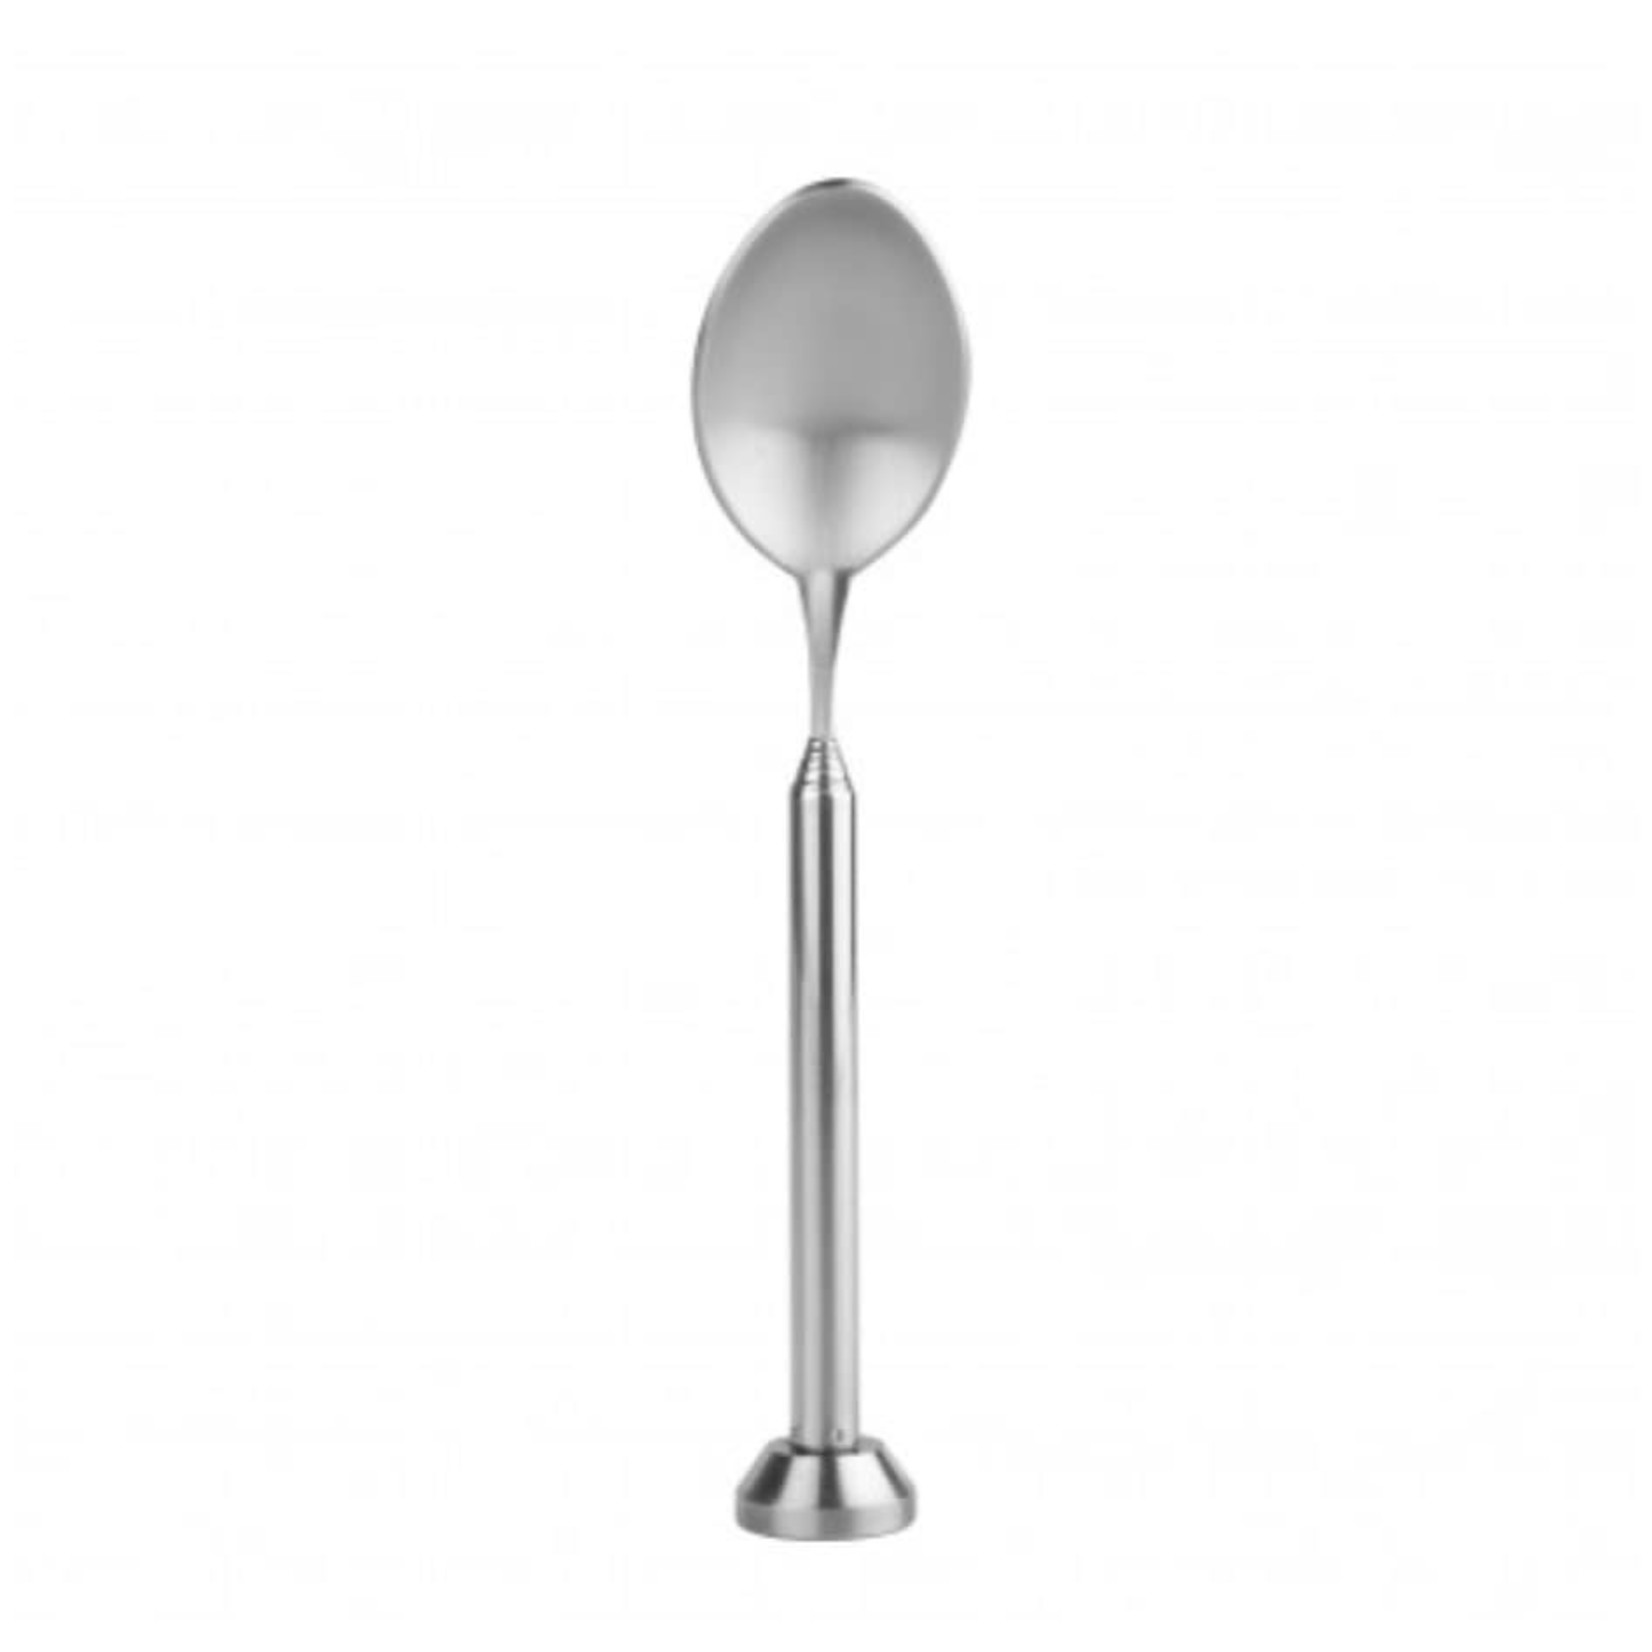 FINAL TOUCH FINAL TOUCH Telescopic Bar Spoon - Stainless